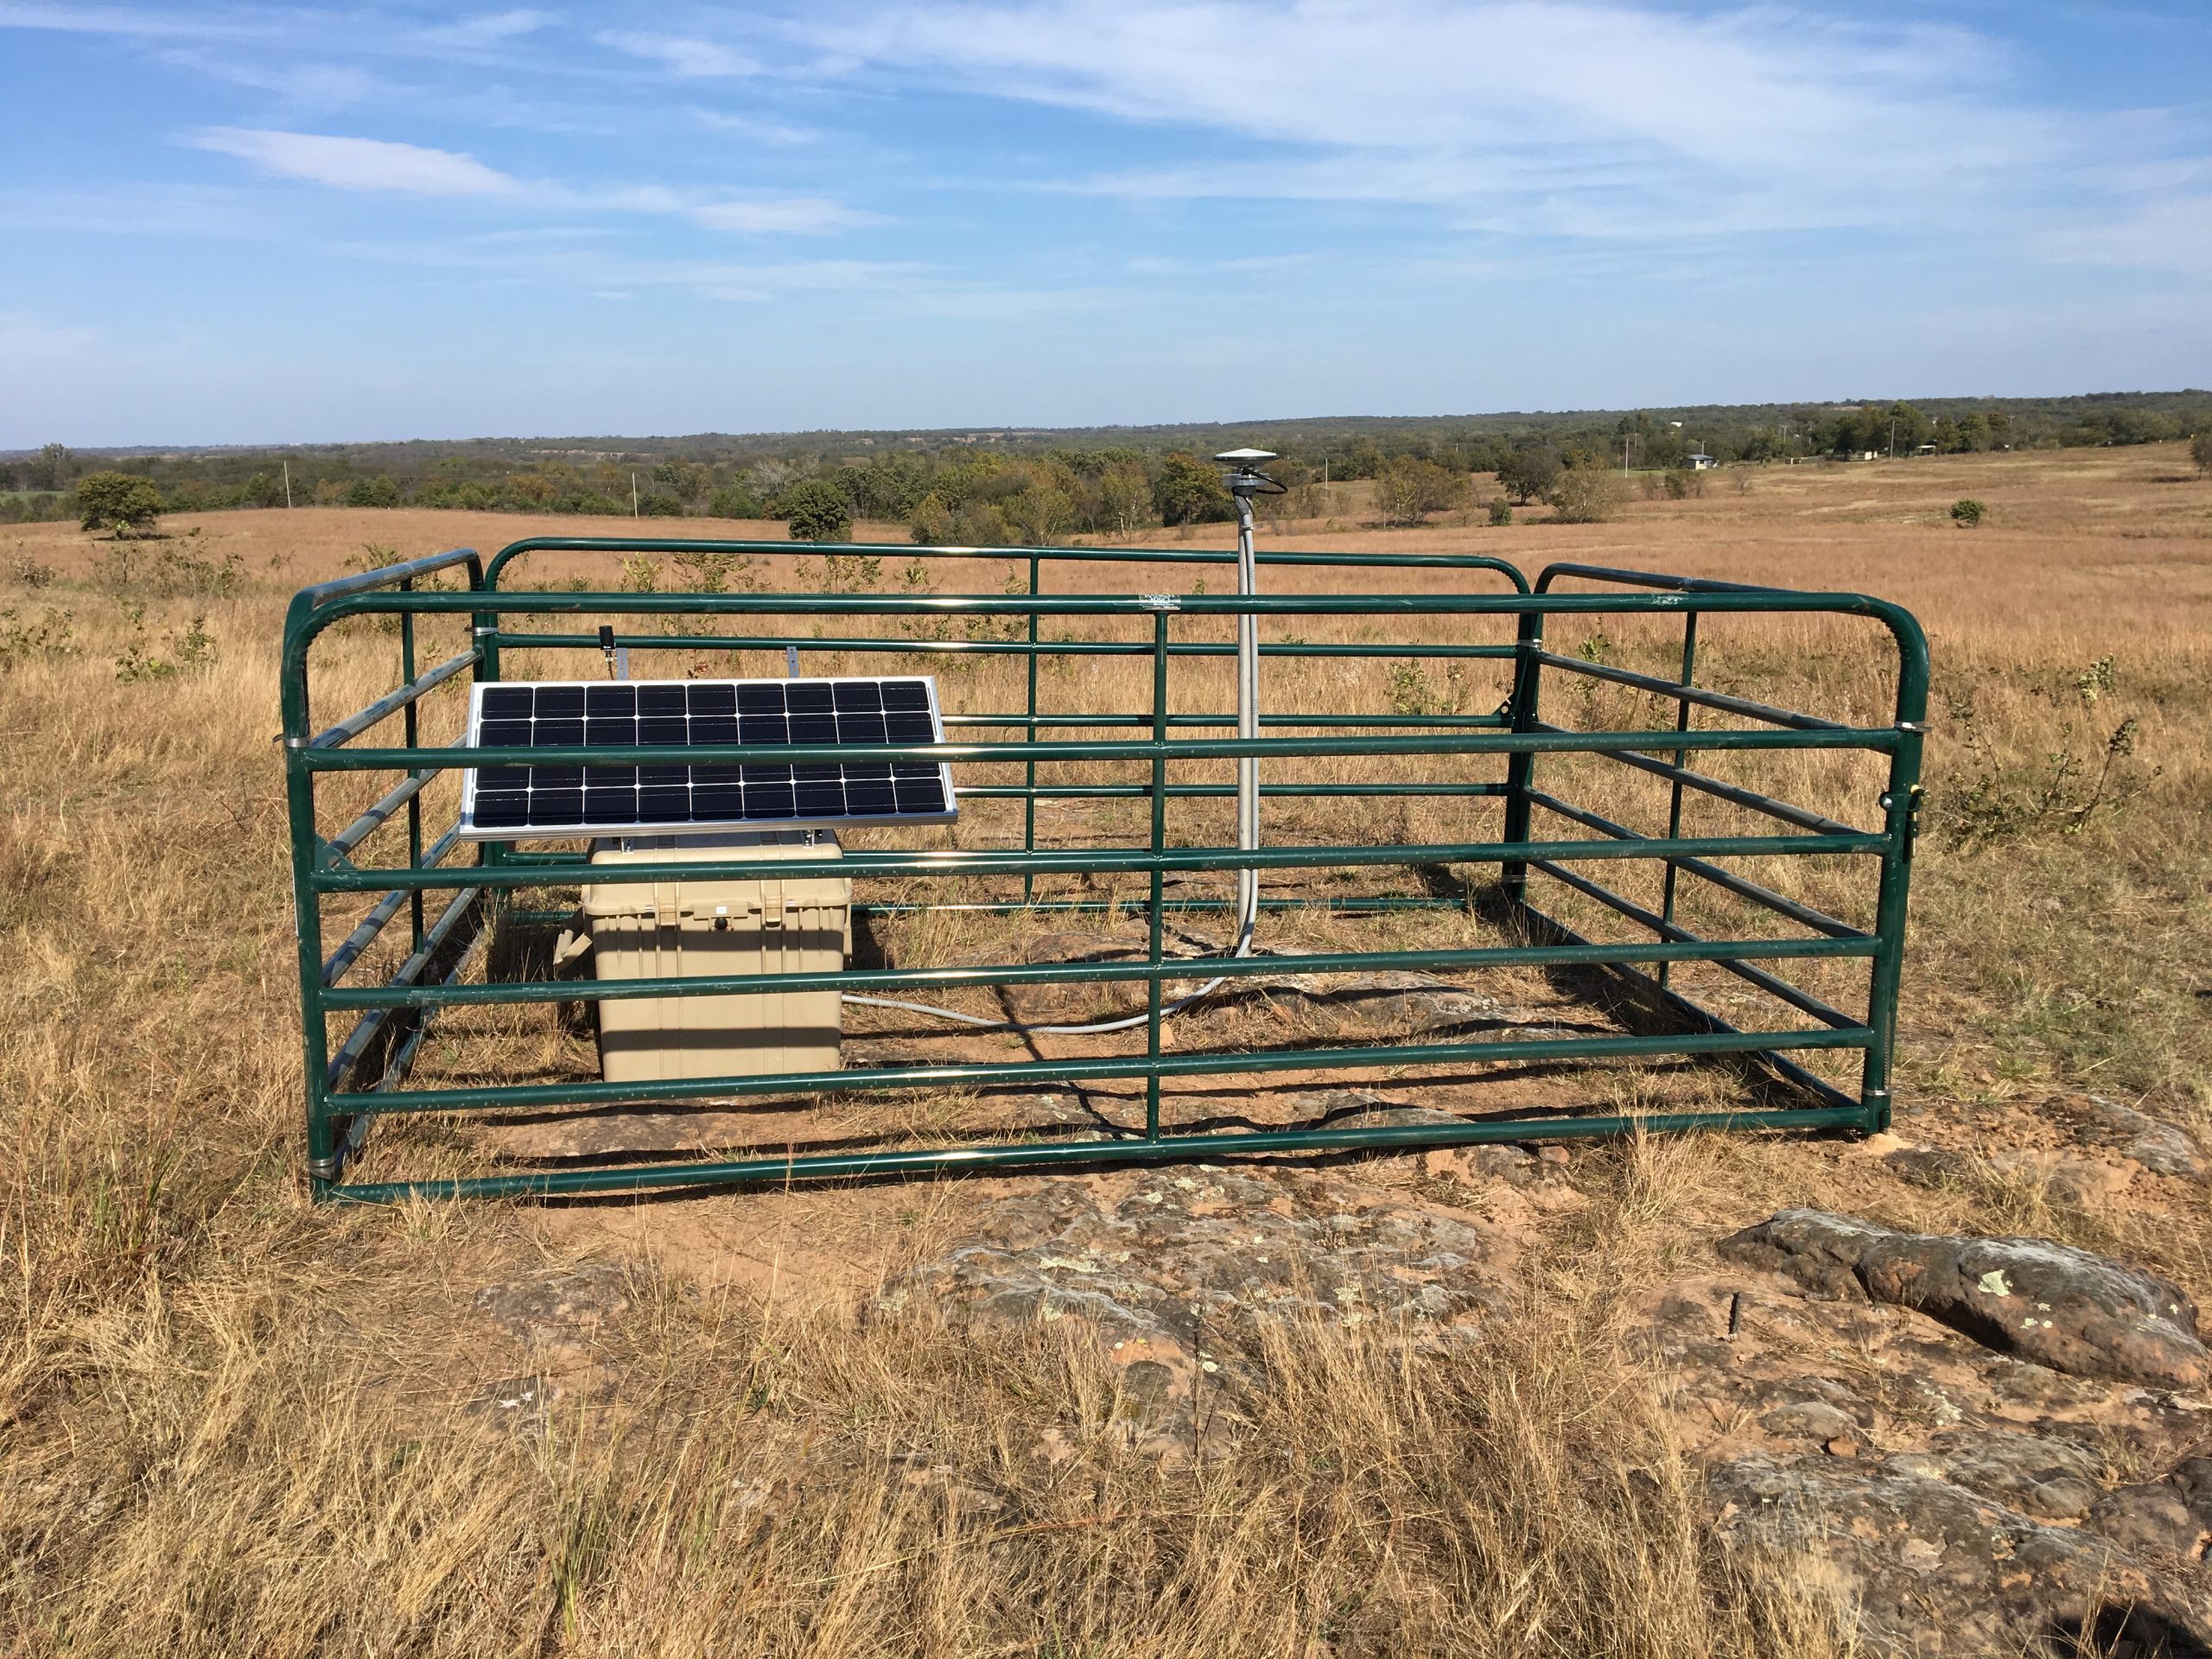 GPS monument and solar panel in a fenced area.